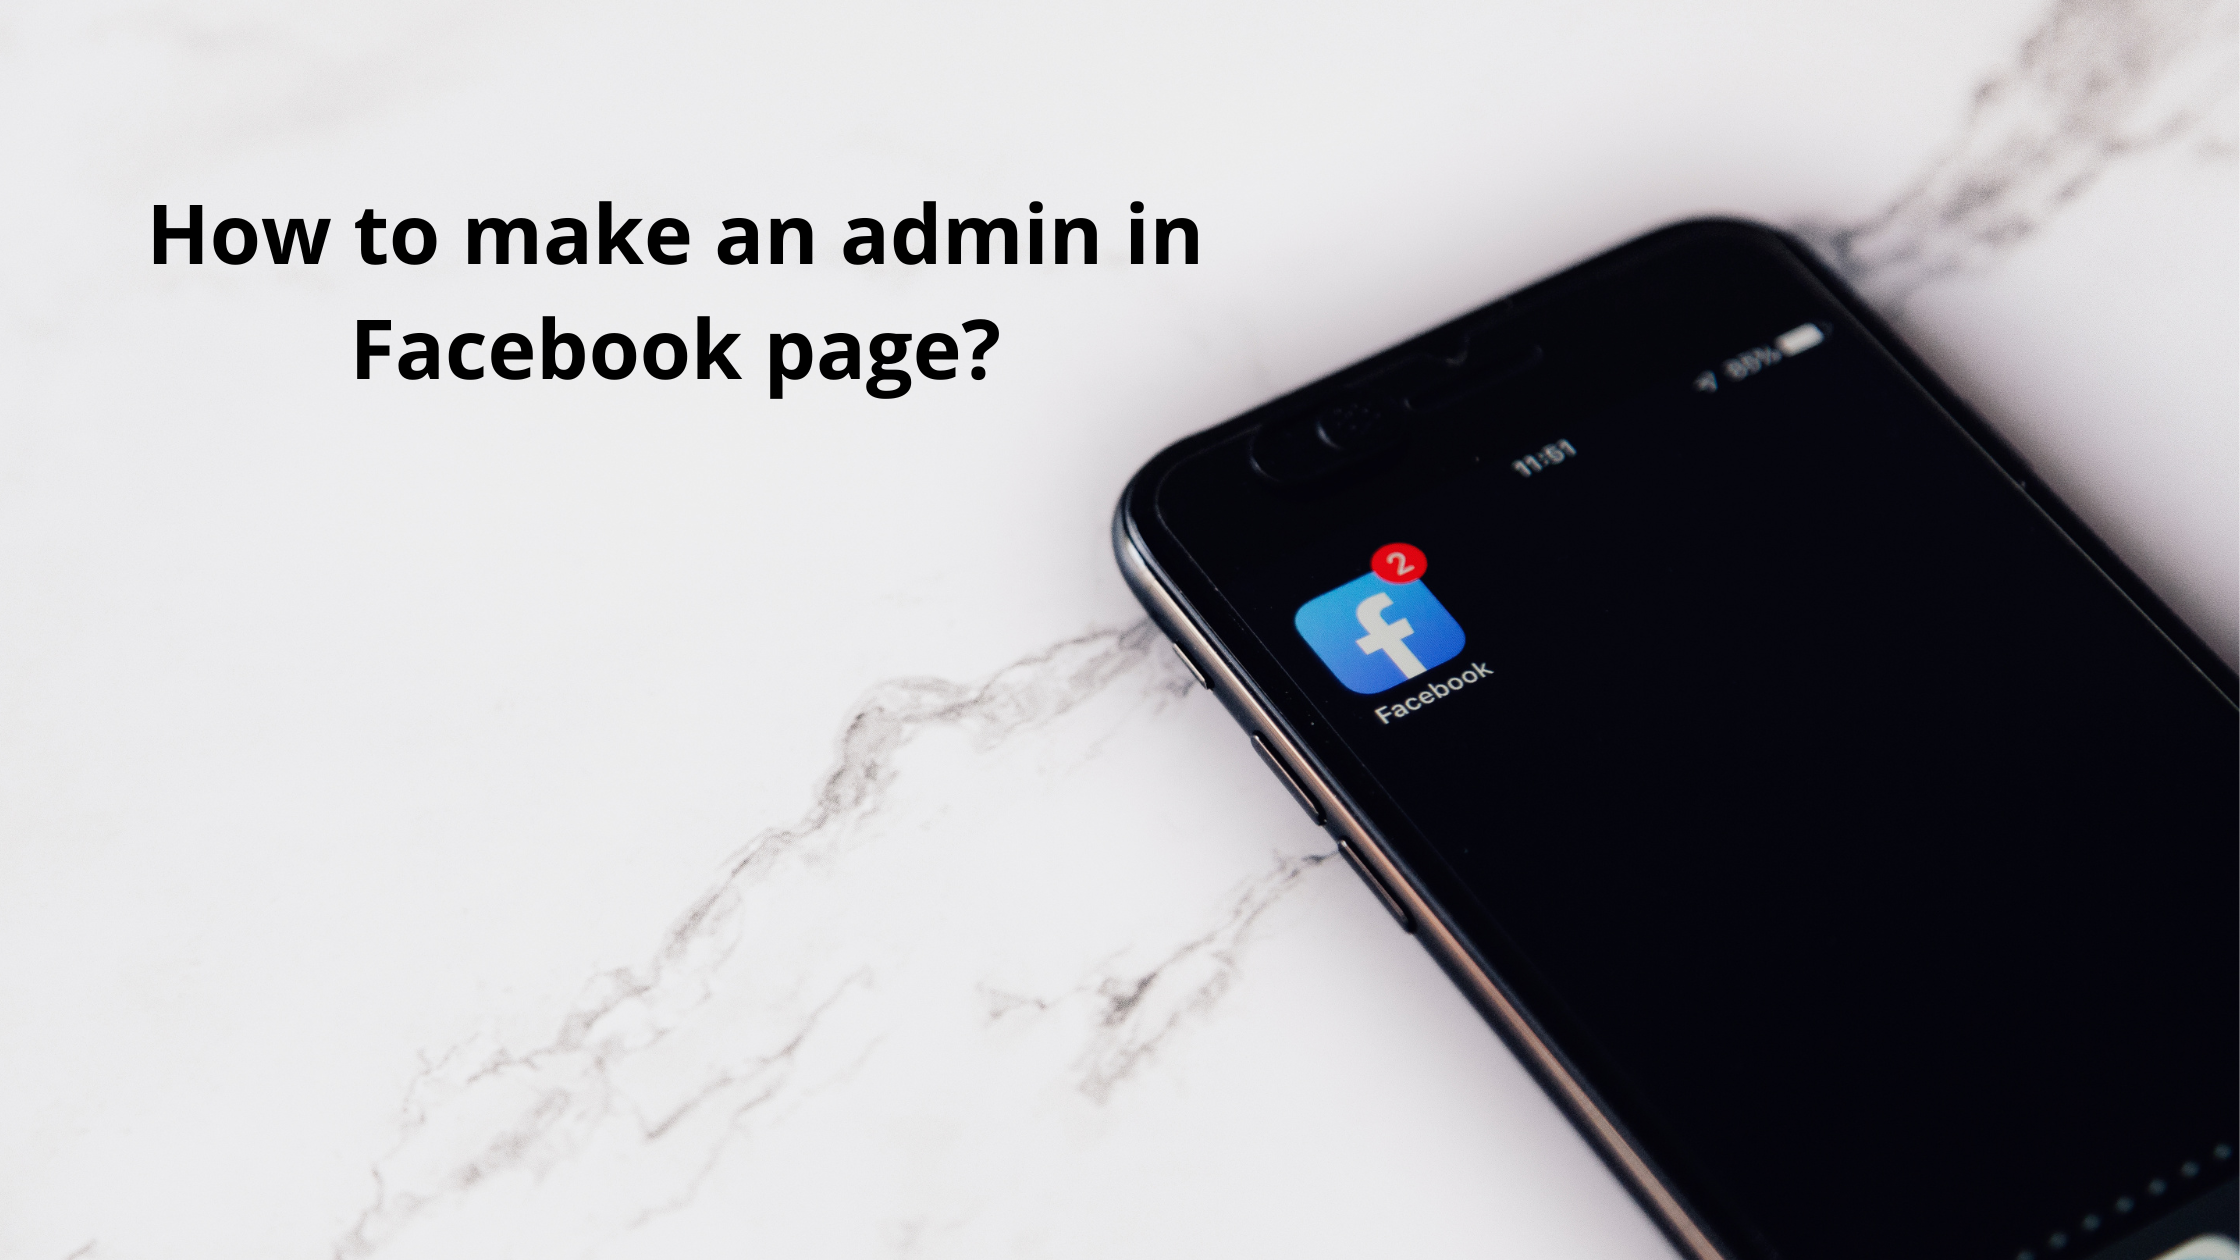 How to make an admin in Facebook page?